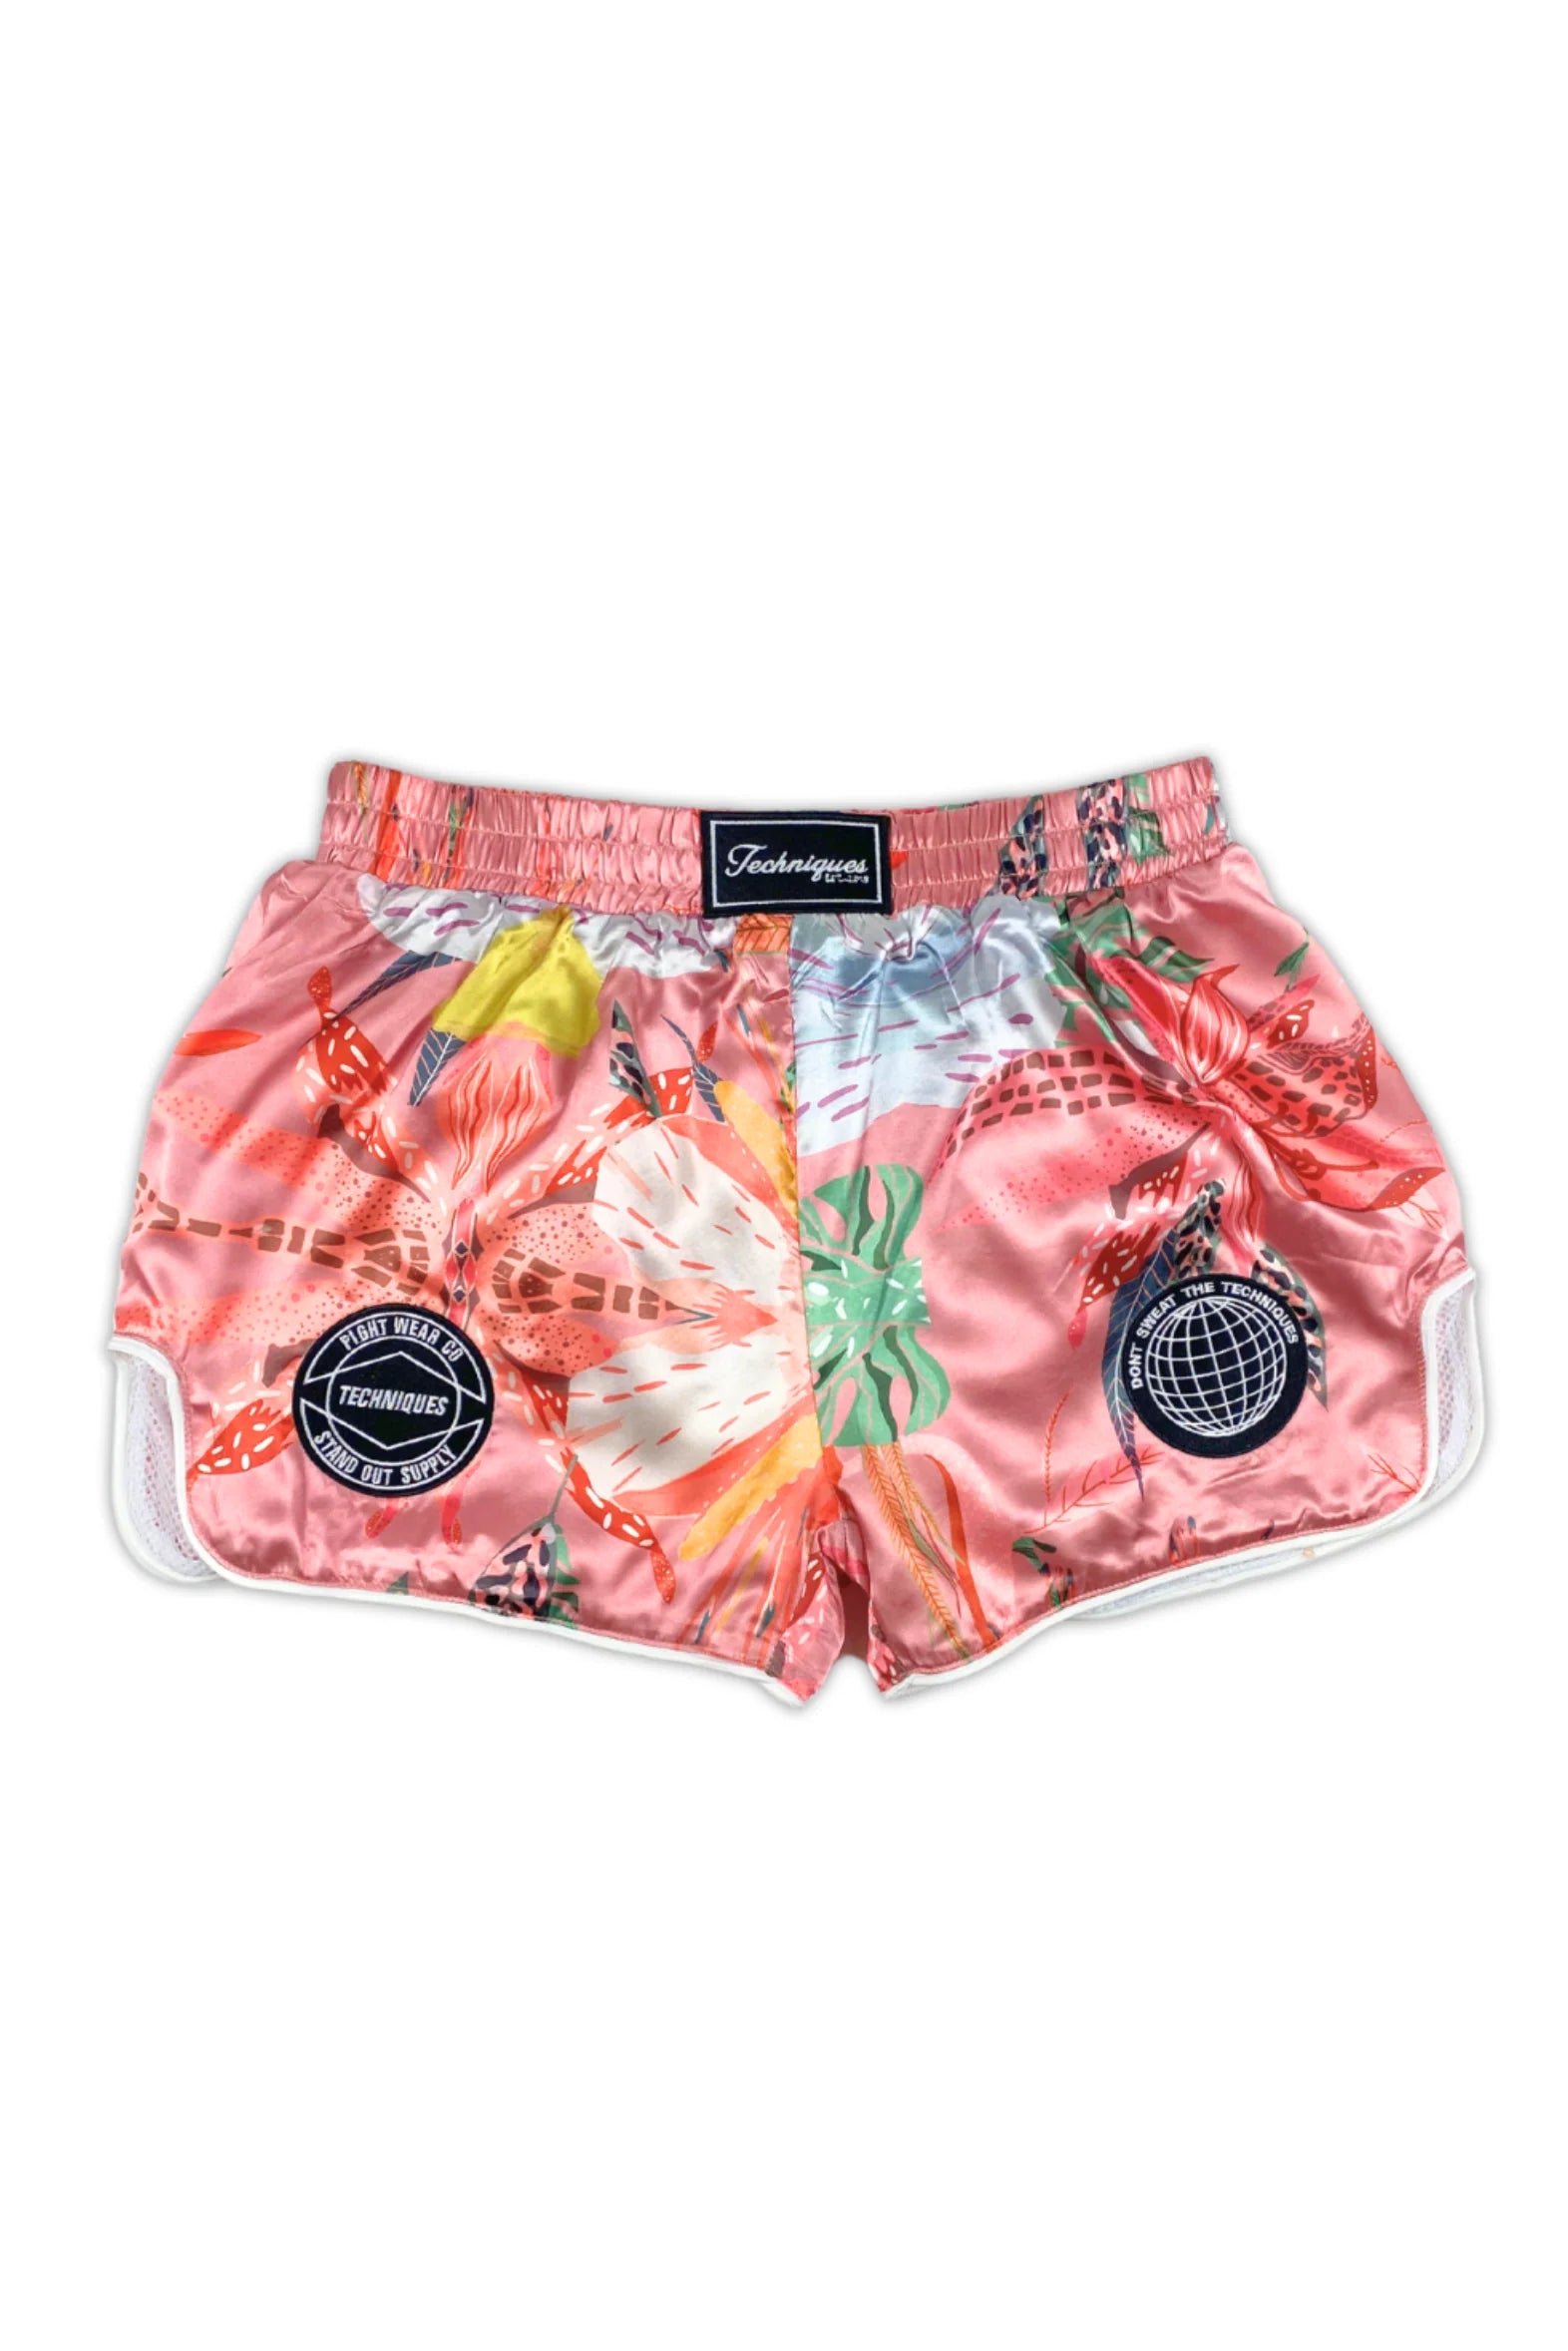 Floral Muay Thai Shorts - Retro Boxing Gear Front View